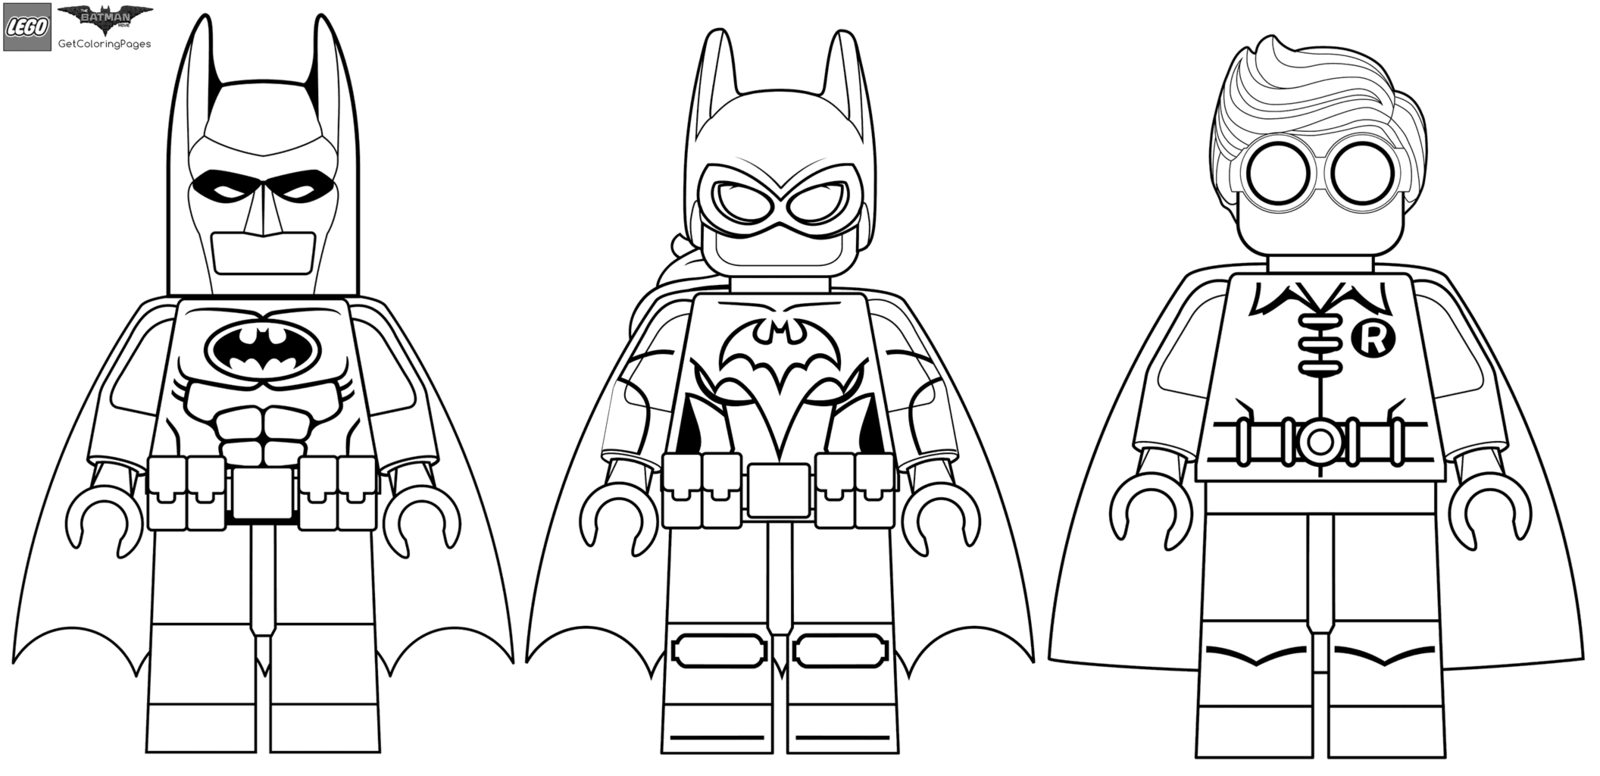 Lego Batman Coloring pages 🖌 to print and color